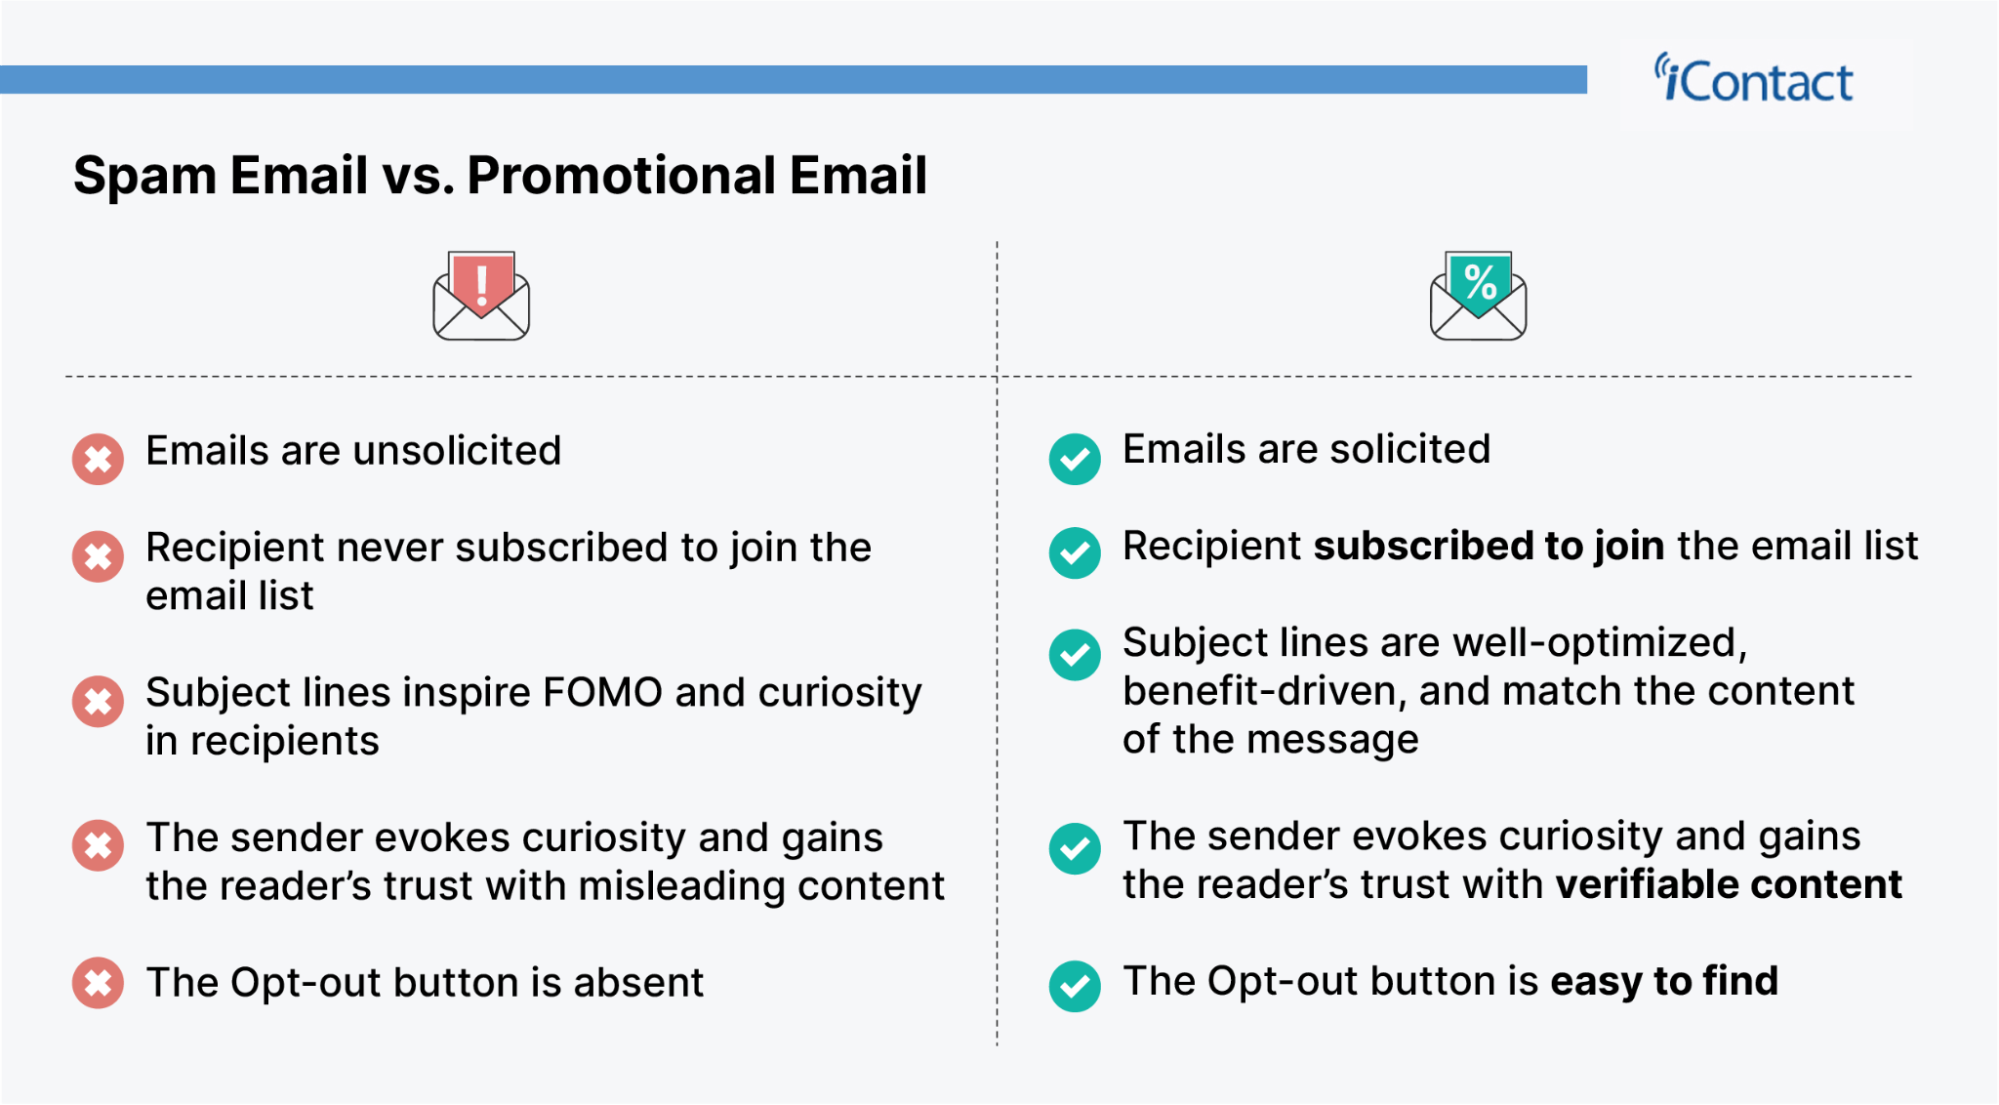 Spam email versus promotional email